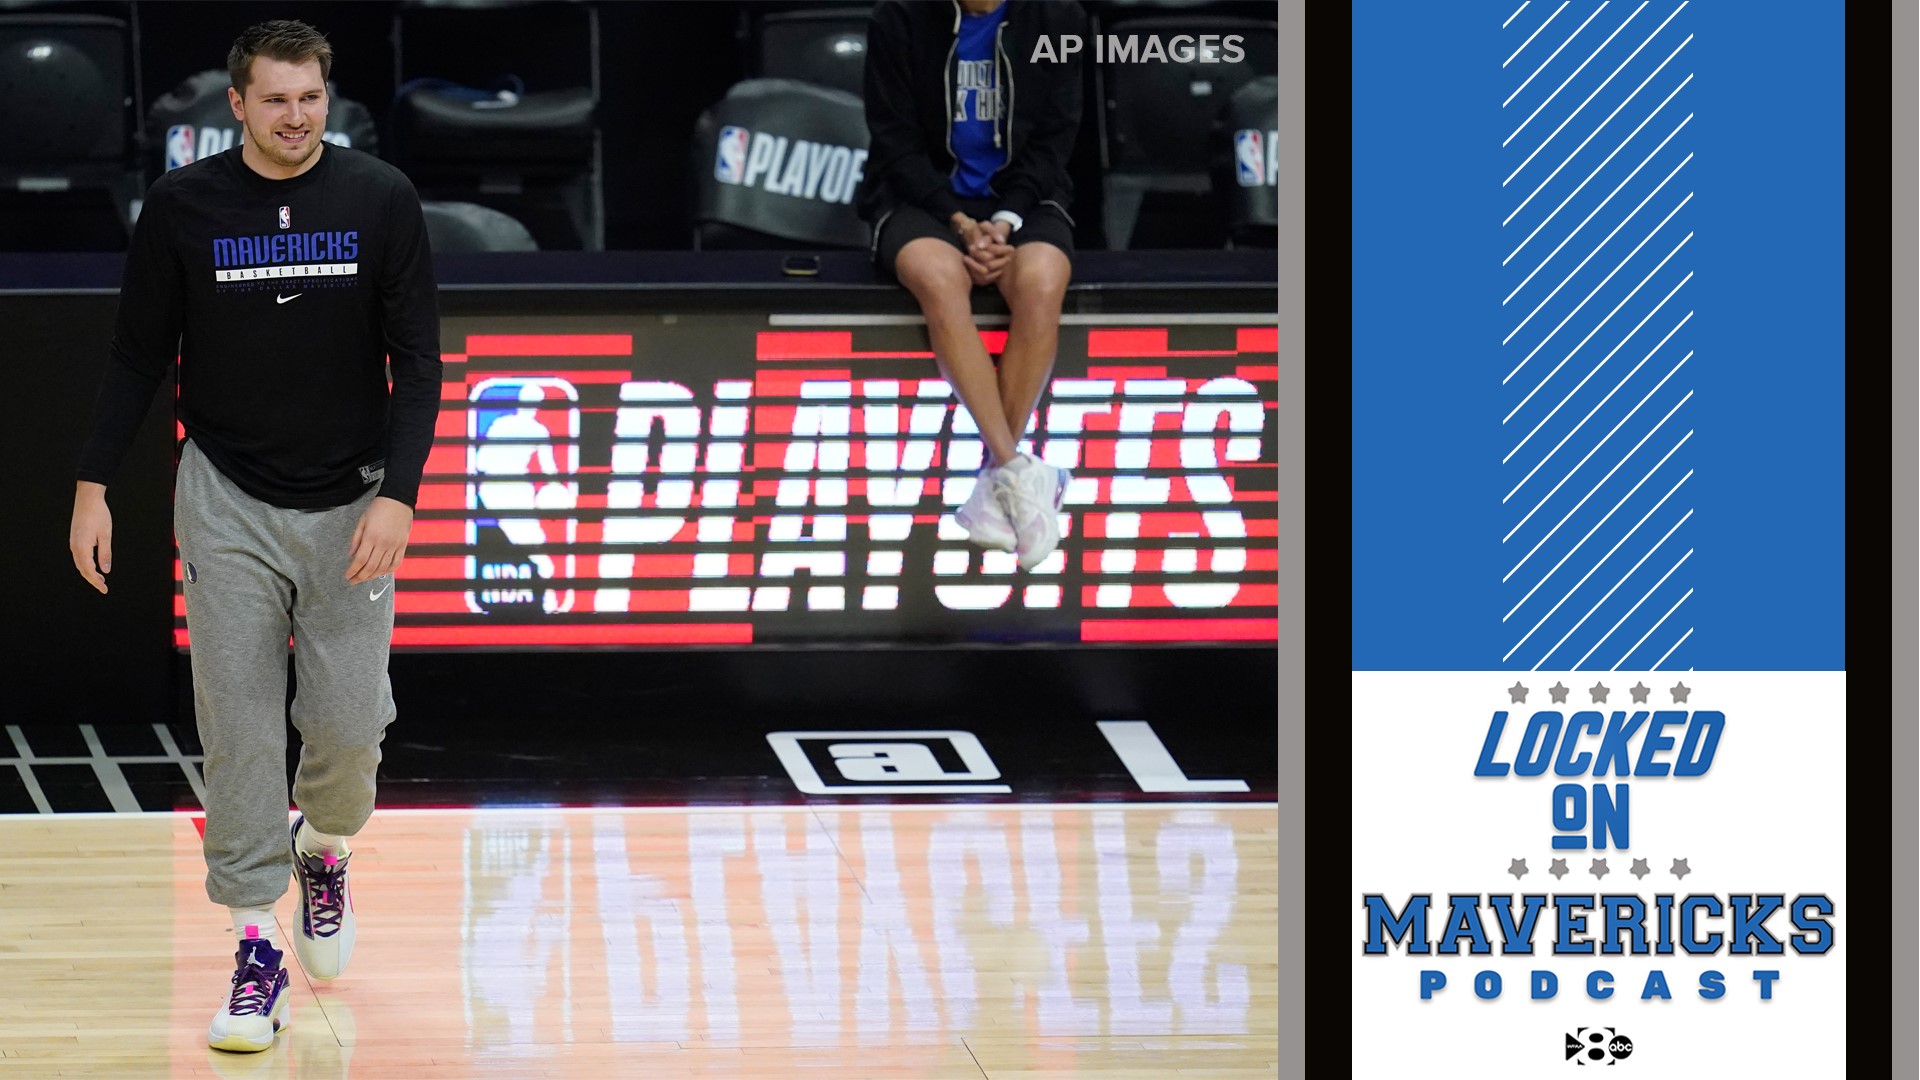 Nick Angstadt (@NickVanExit) and Isaac Harris (@IsaacLHarris) share 5 things the Mavs have to do this offseason, including signing Luka Doncic to an extension.